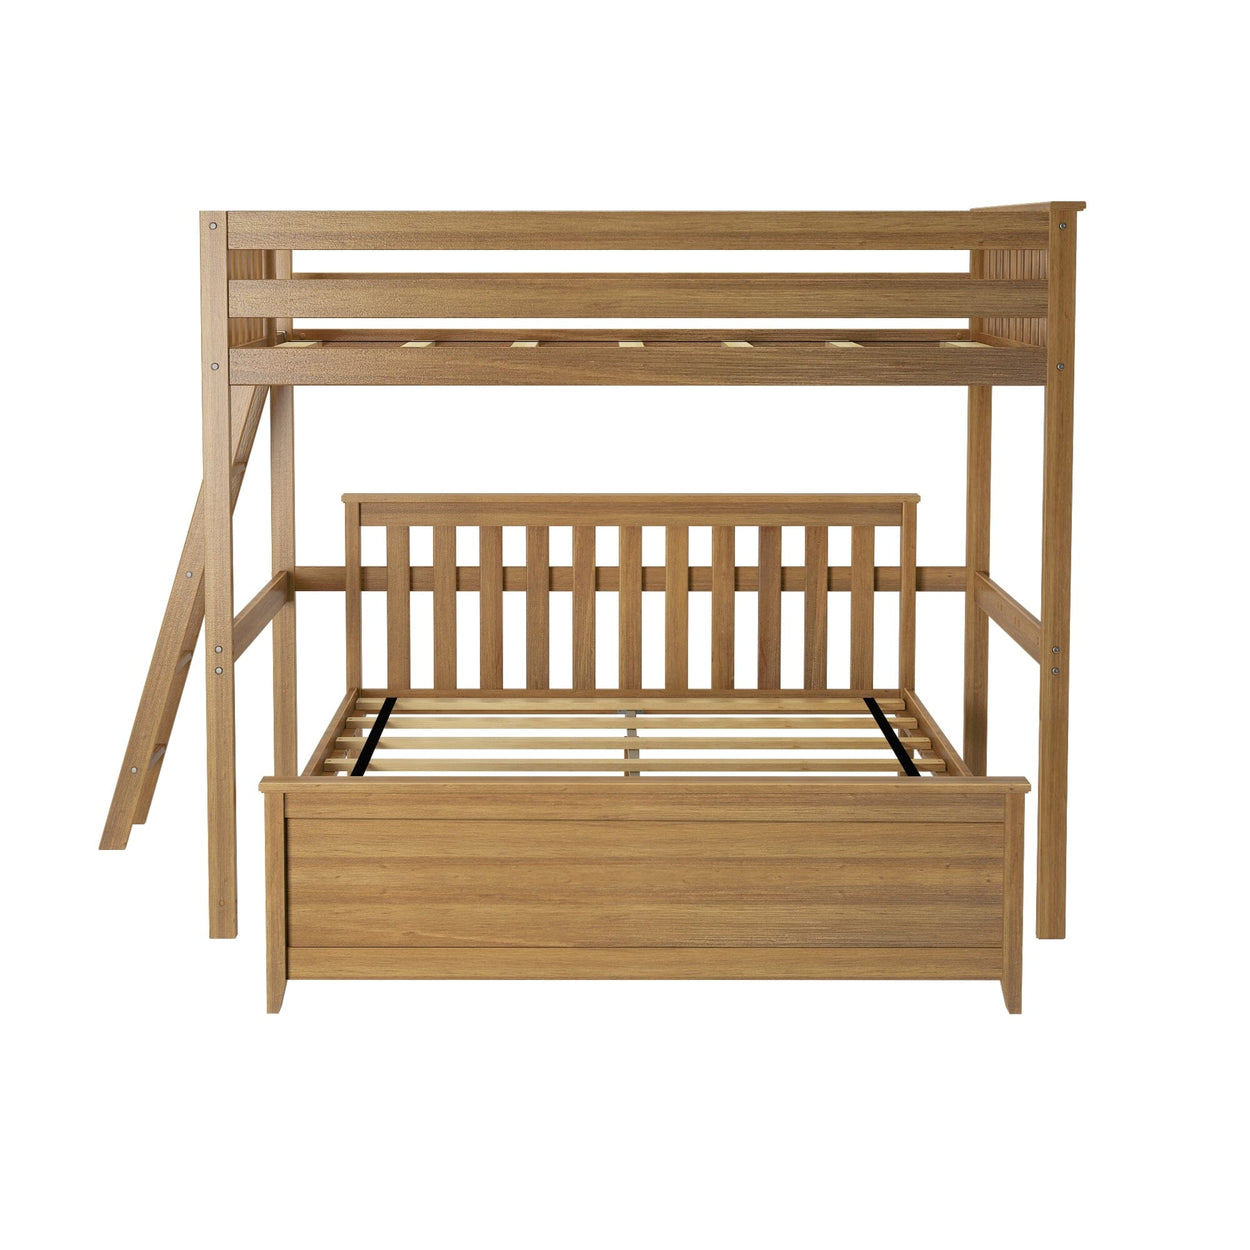 18-733-007 : Bunk Beds L-Shaped Full over Queen Bunk Bed with Ladder on End, Pecan